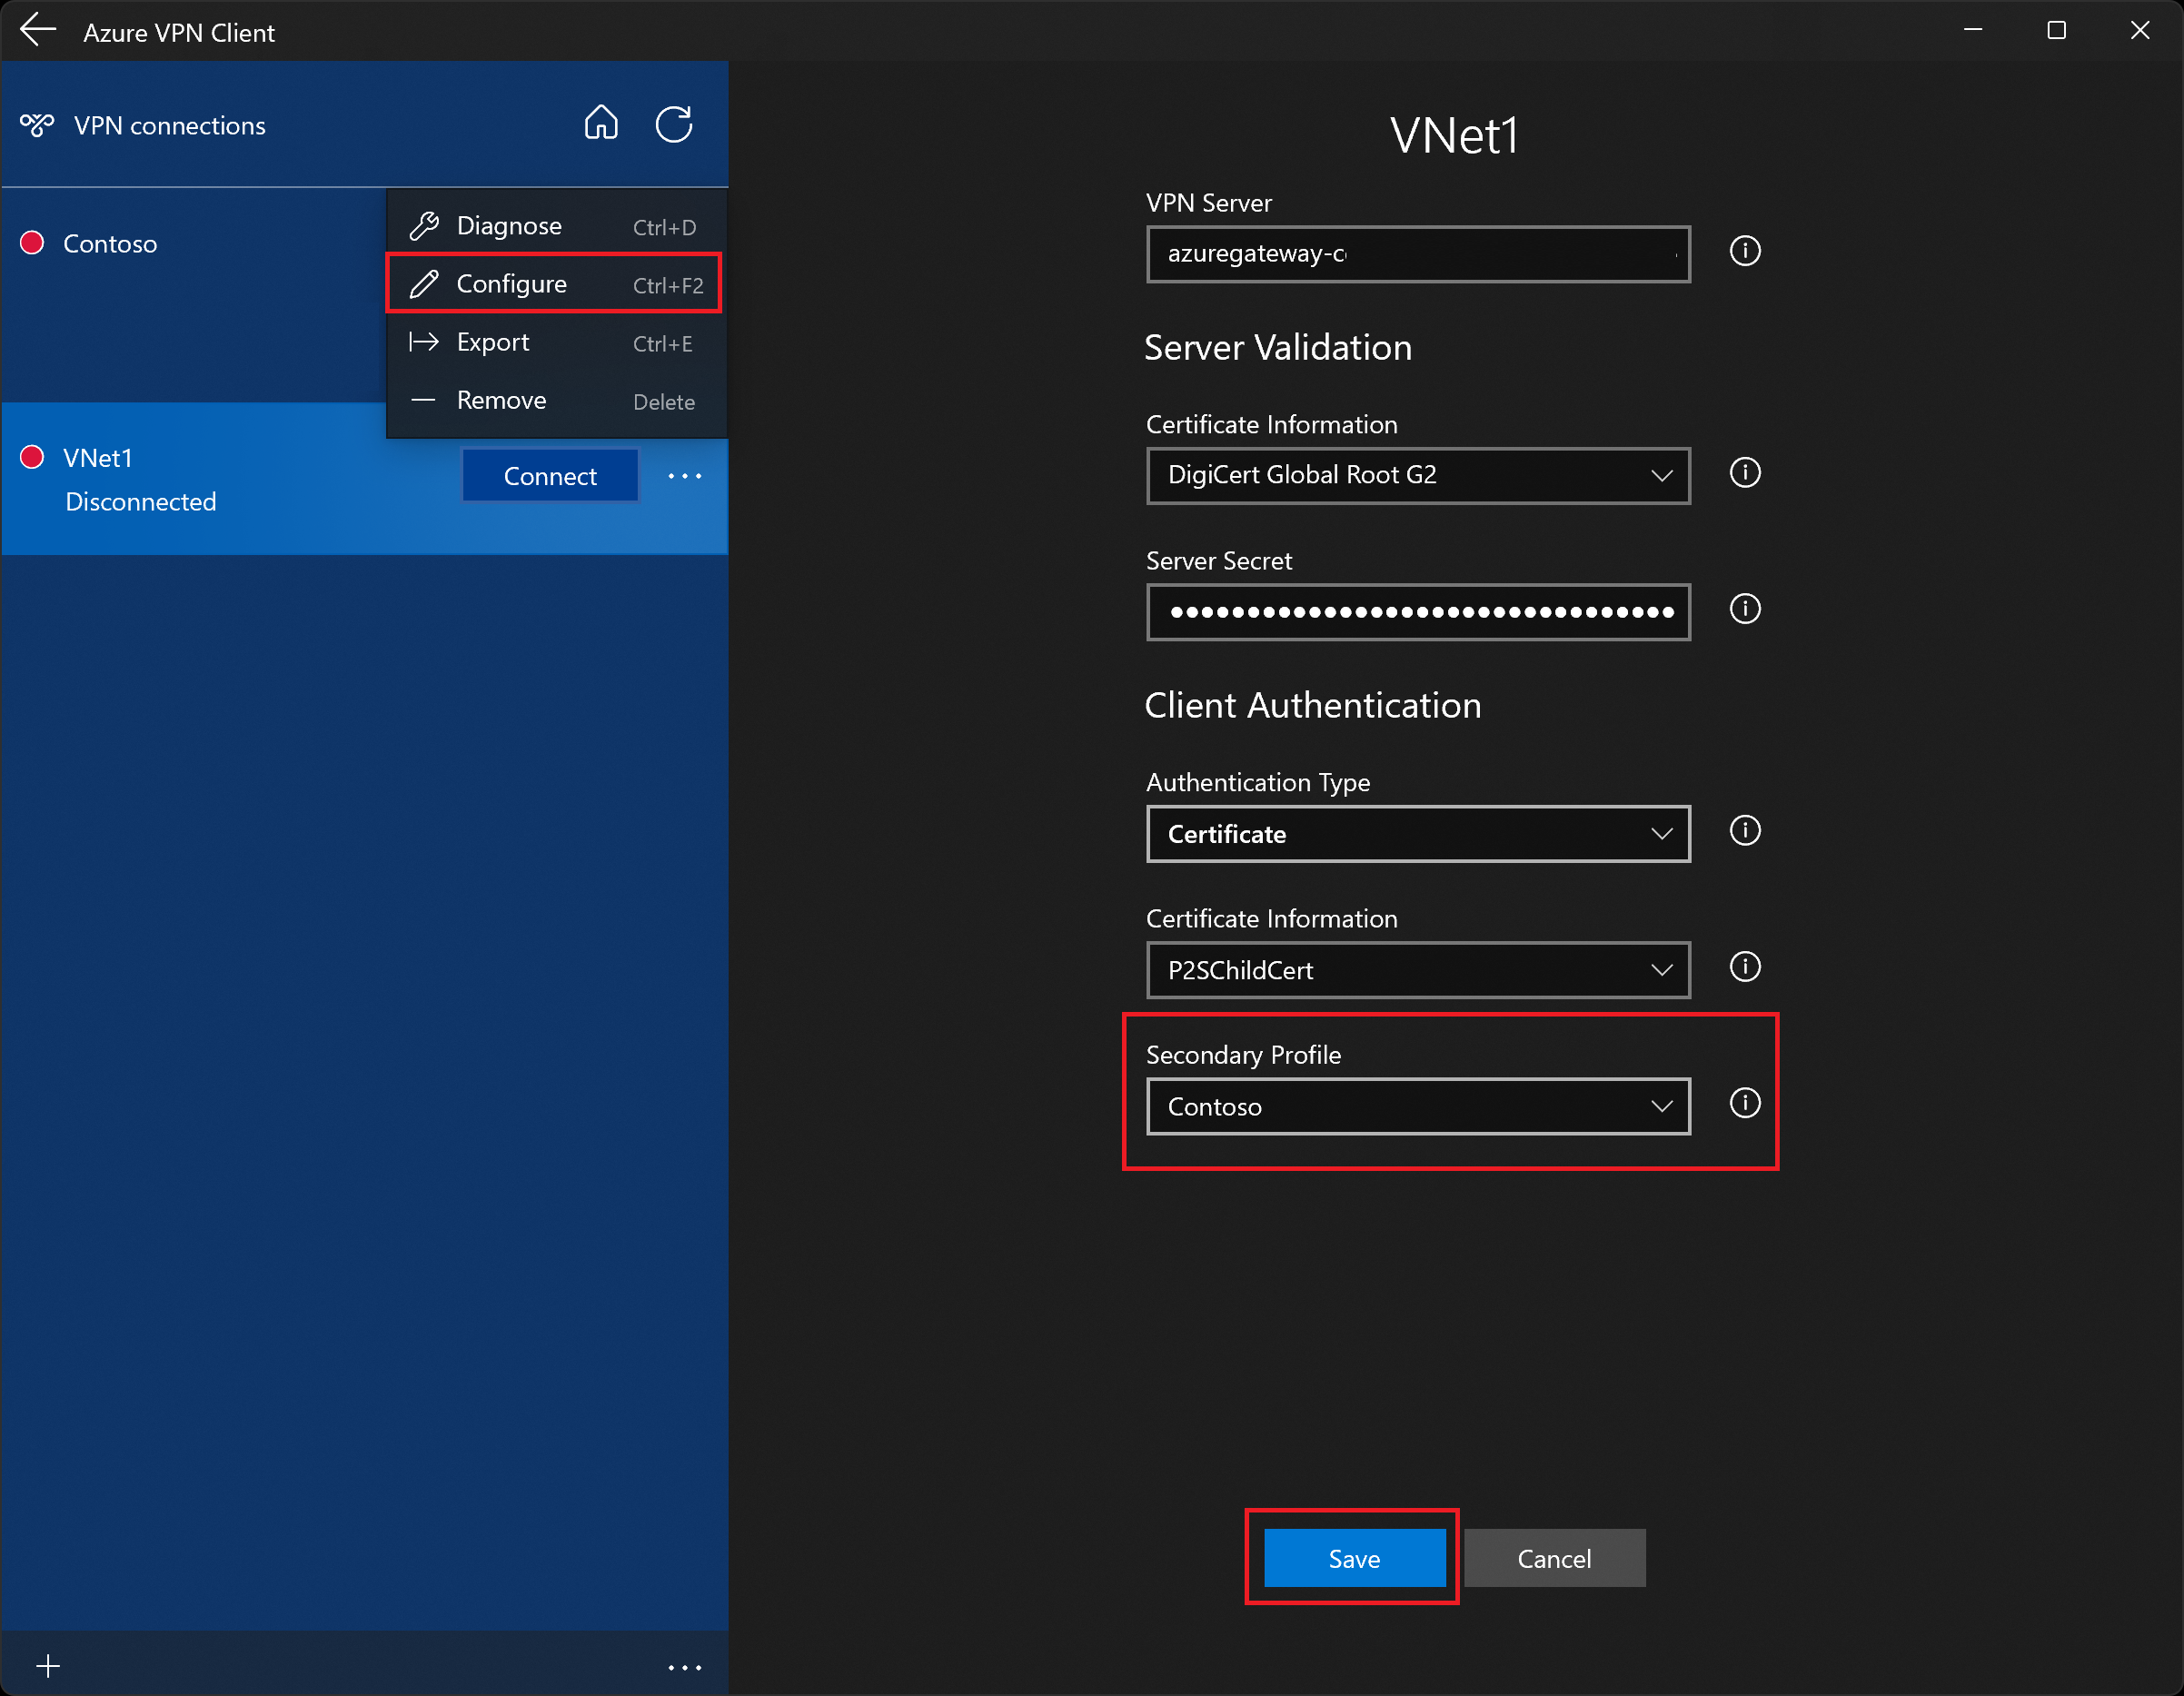 Screenshot showing Azure VPN client profile configuration page with secondary profile.